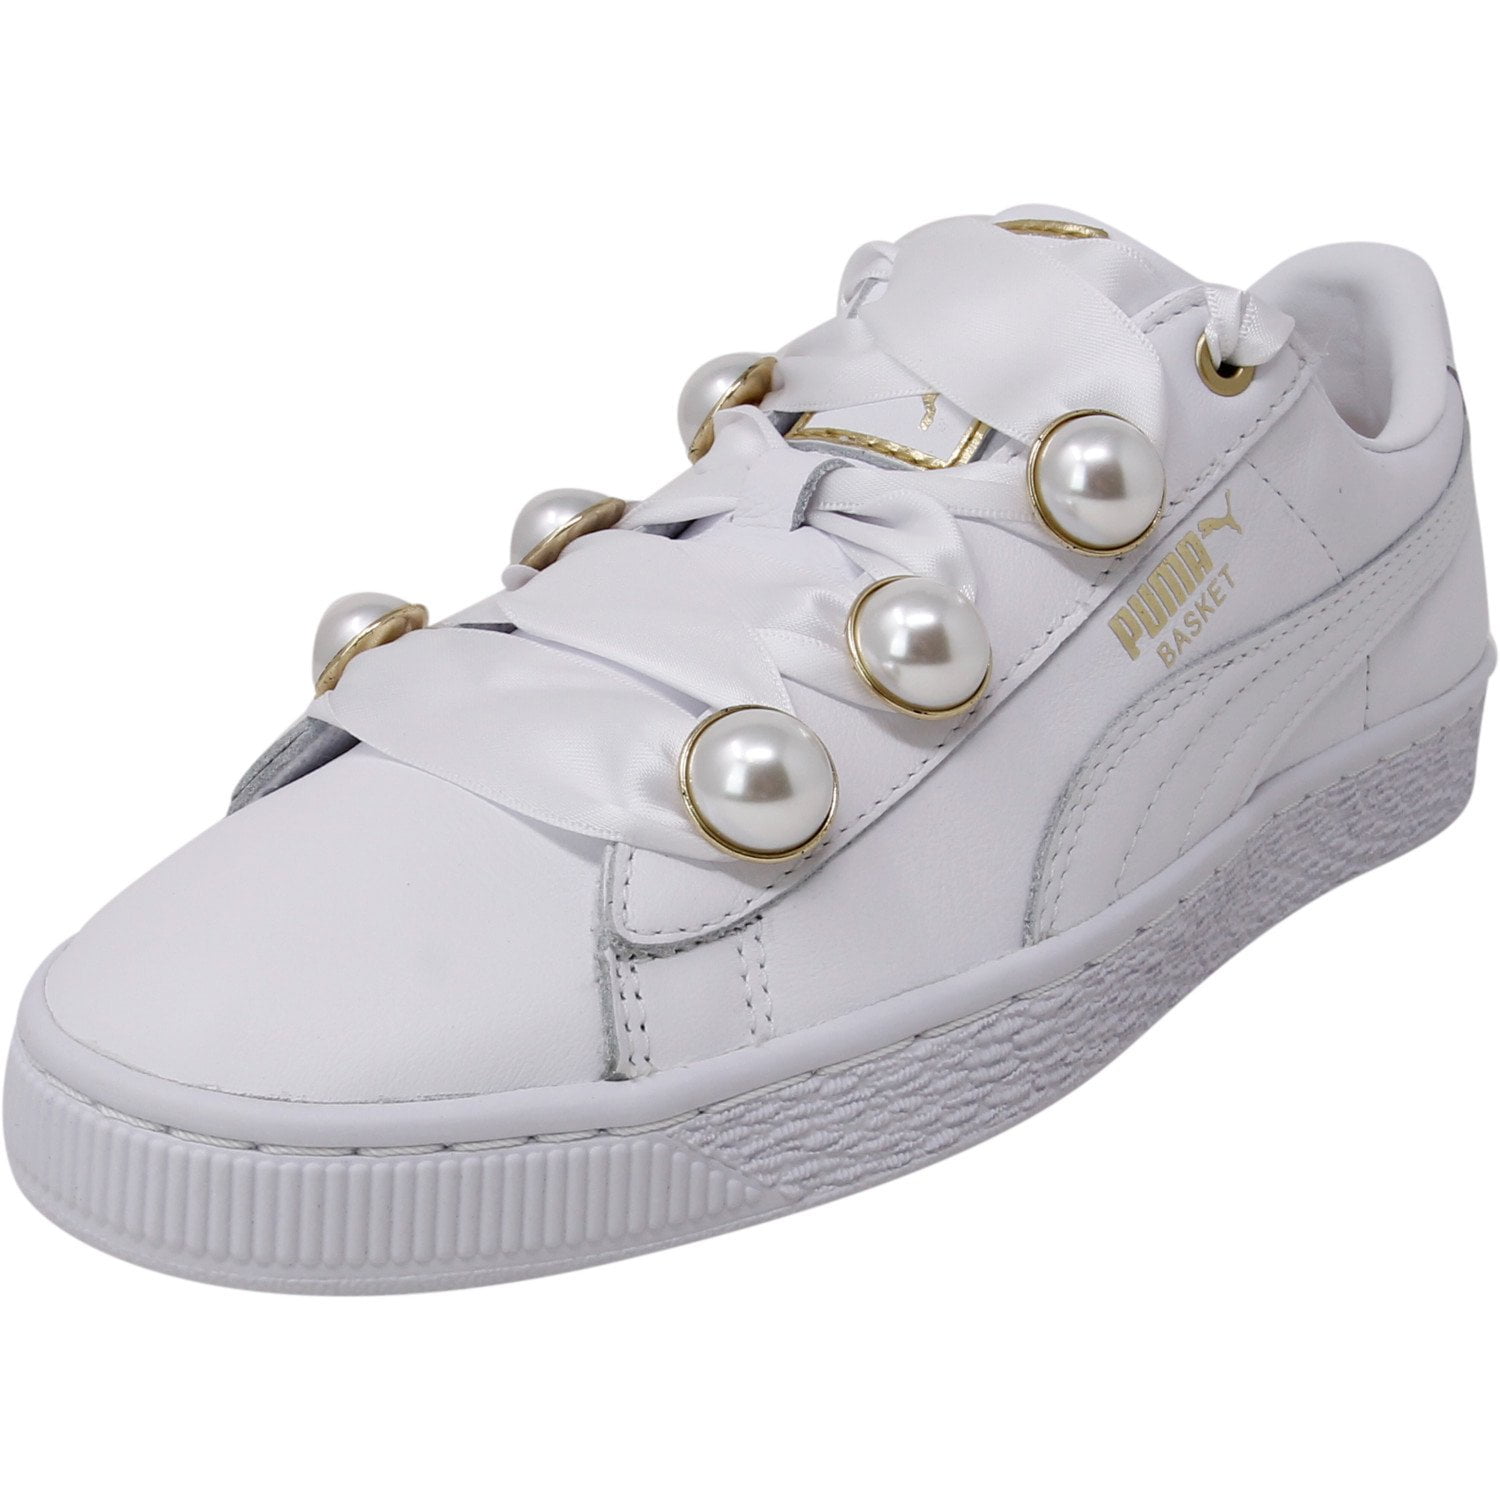 Team Gold Leather Fashion Sneaker 